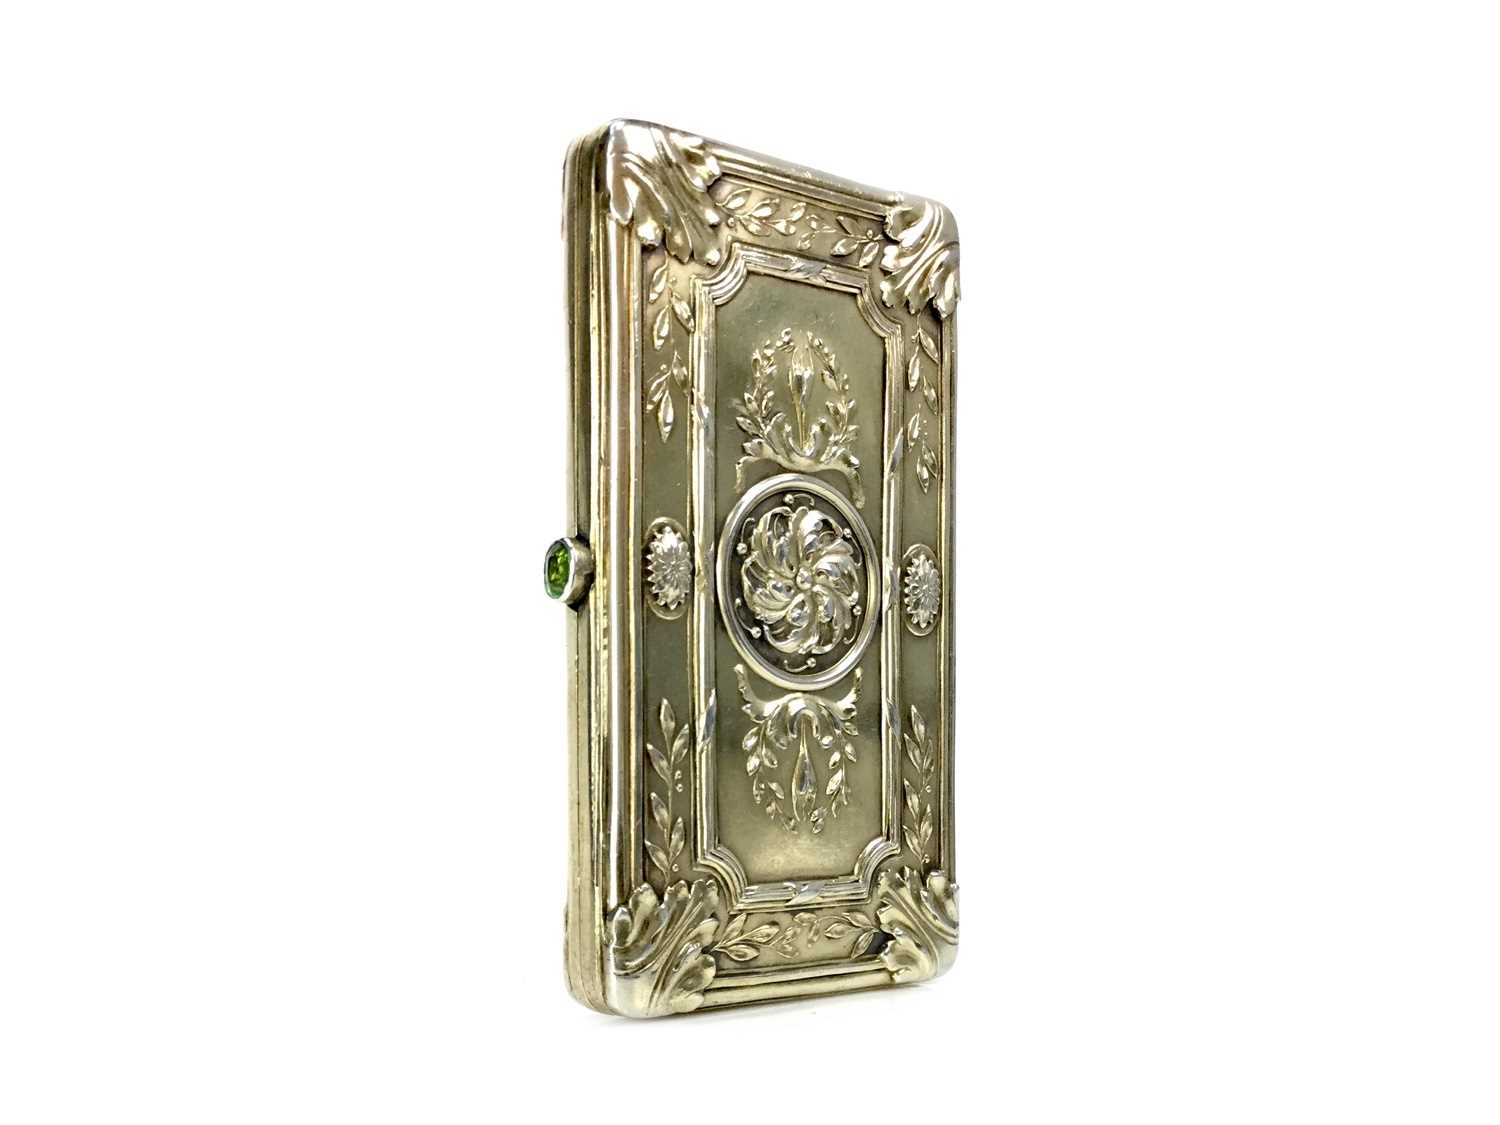 Lot 406 - AN EARLY 20TH CENTURY FRENCH SILVER GILT CIGARETTE CASE